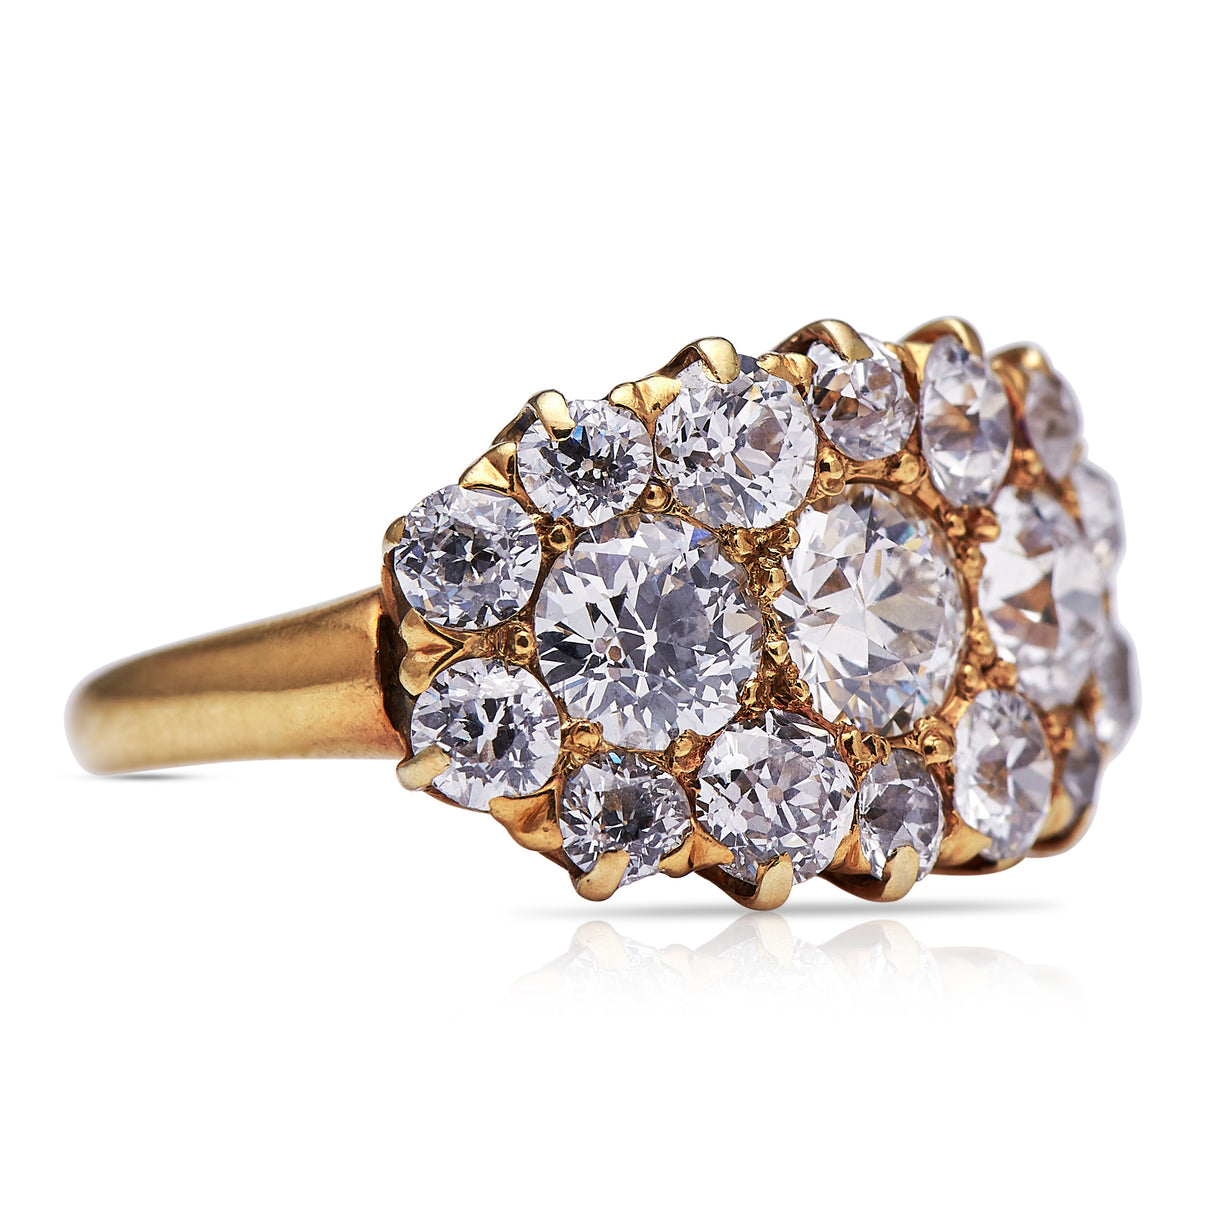 Antique Engagement Rings | Antique Ring Boutique | Vintage Engagement Rings | Antique Engagement Rings | Antique Jewellery company | Vintage Jewellery  Victorian, 18ct Gold, Diamond Cluster Ring